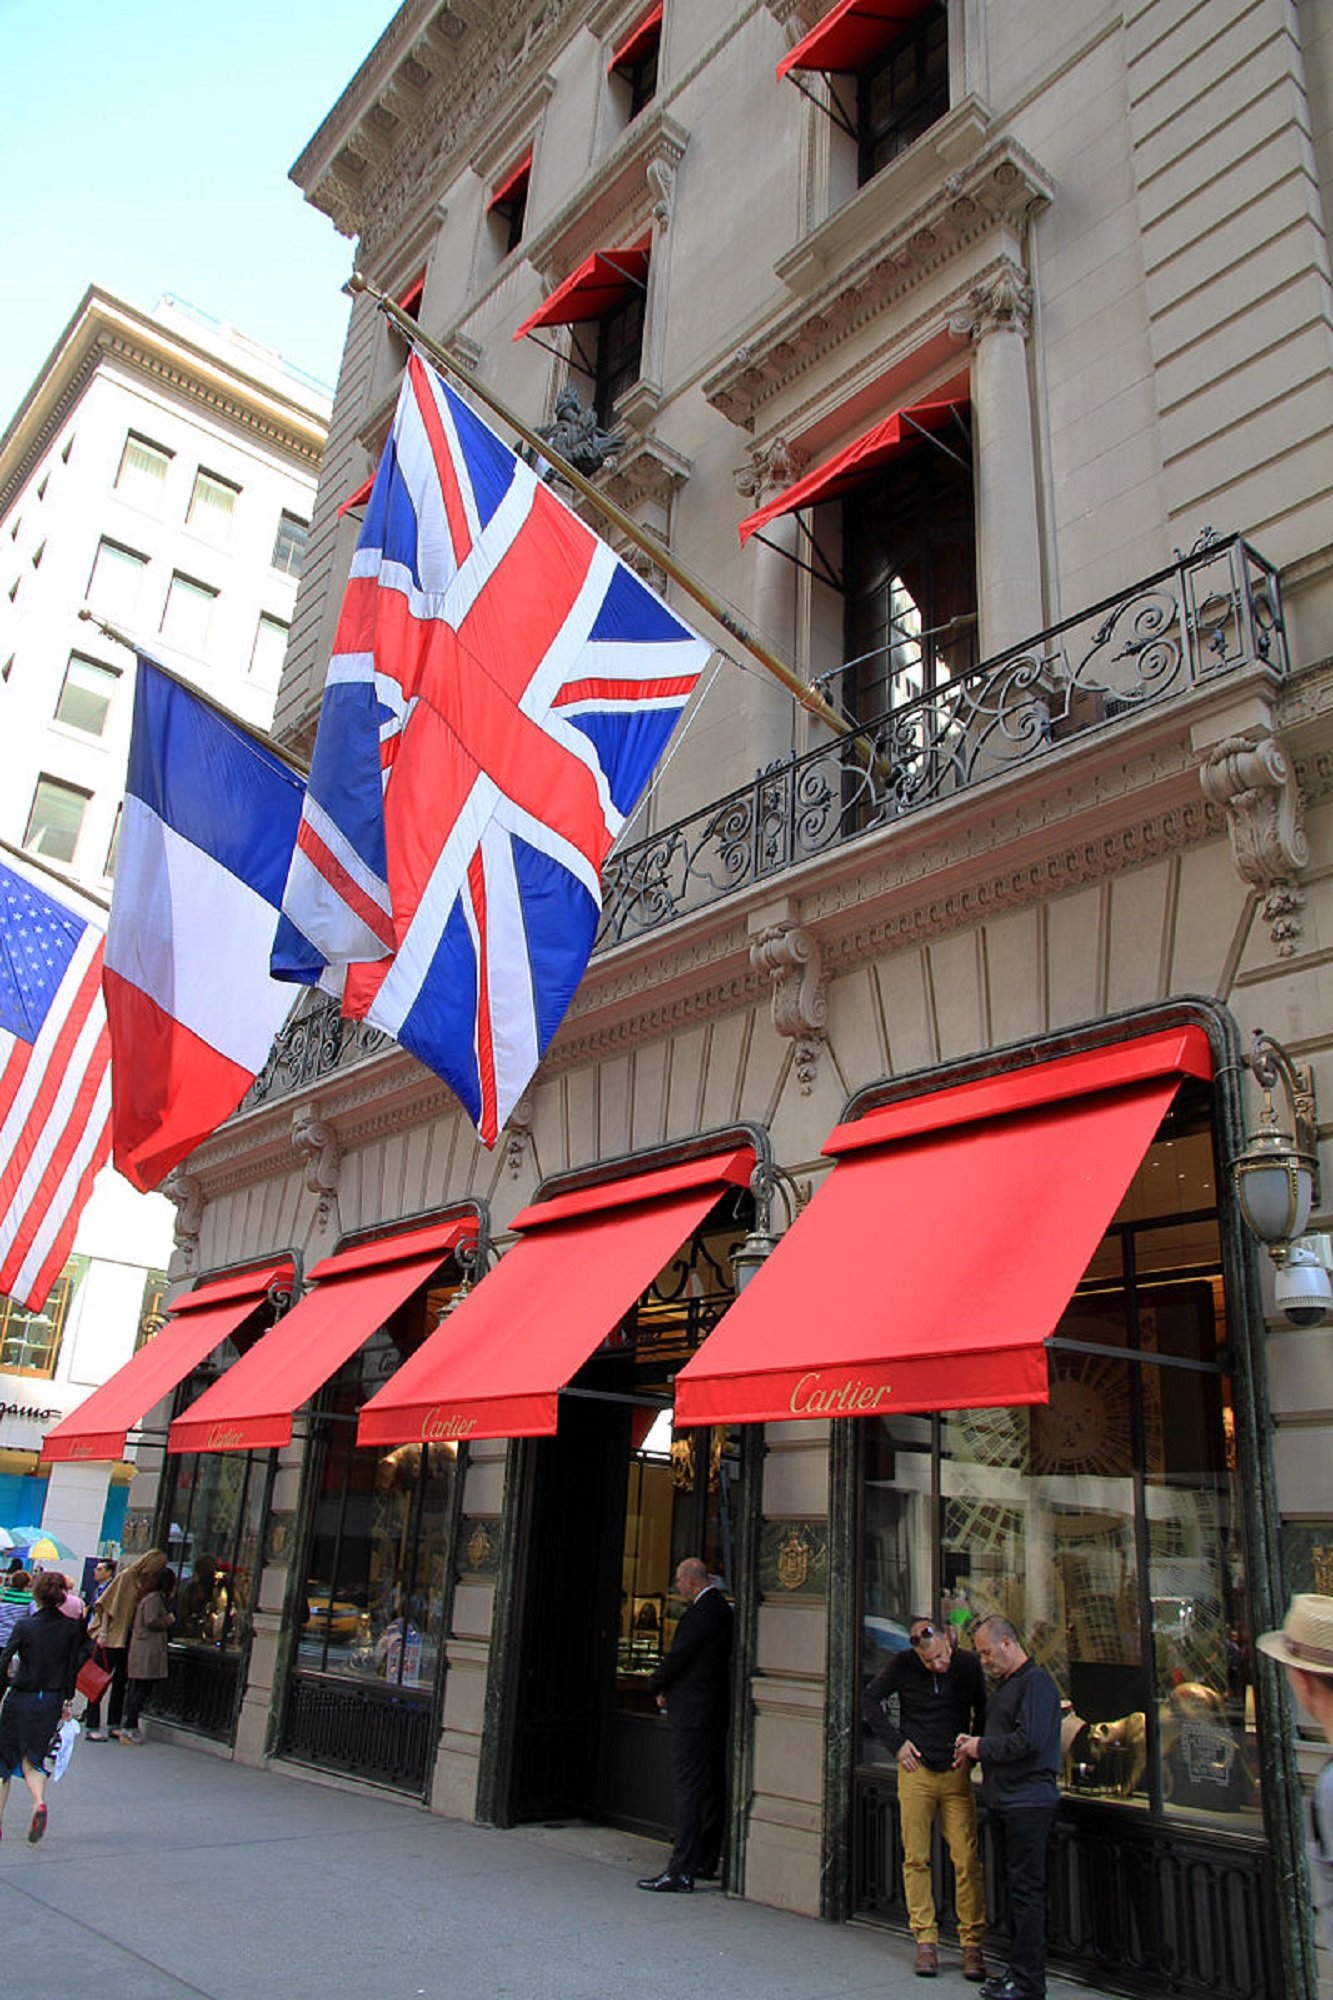 Cartier store in New York offers festive greetings in Catalan